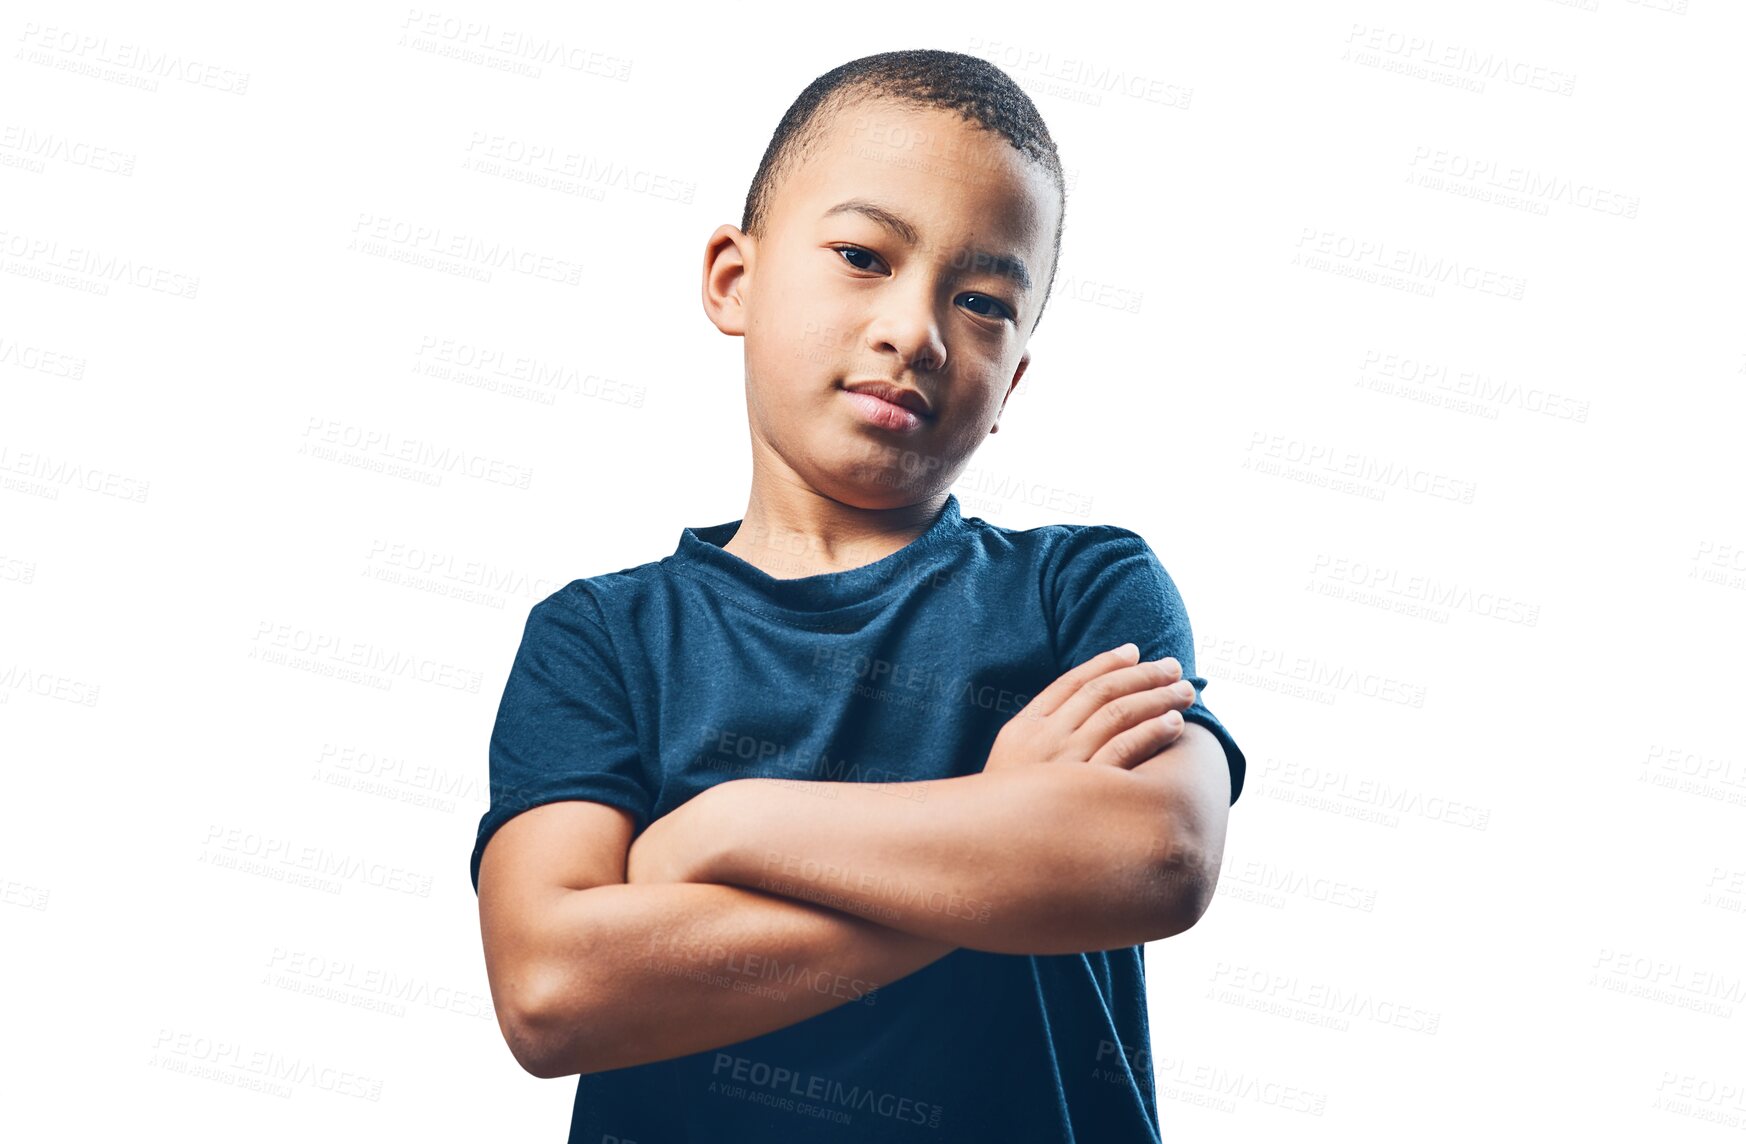 Buy stock photo Portrait, serious and kid with arms crossed isolated on a transparent png background. Confident face, children and young child from South Africa, cute and innocent, adorable little boy and attitude.